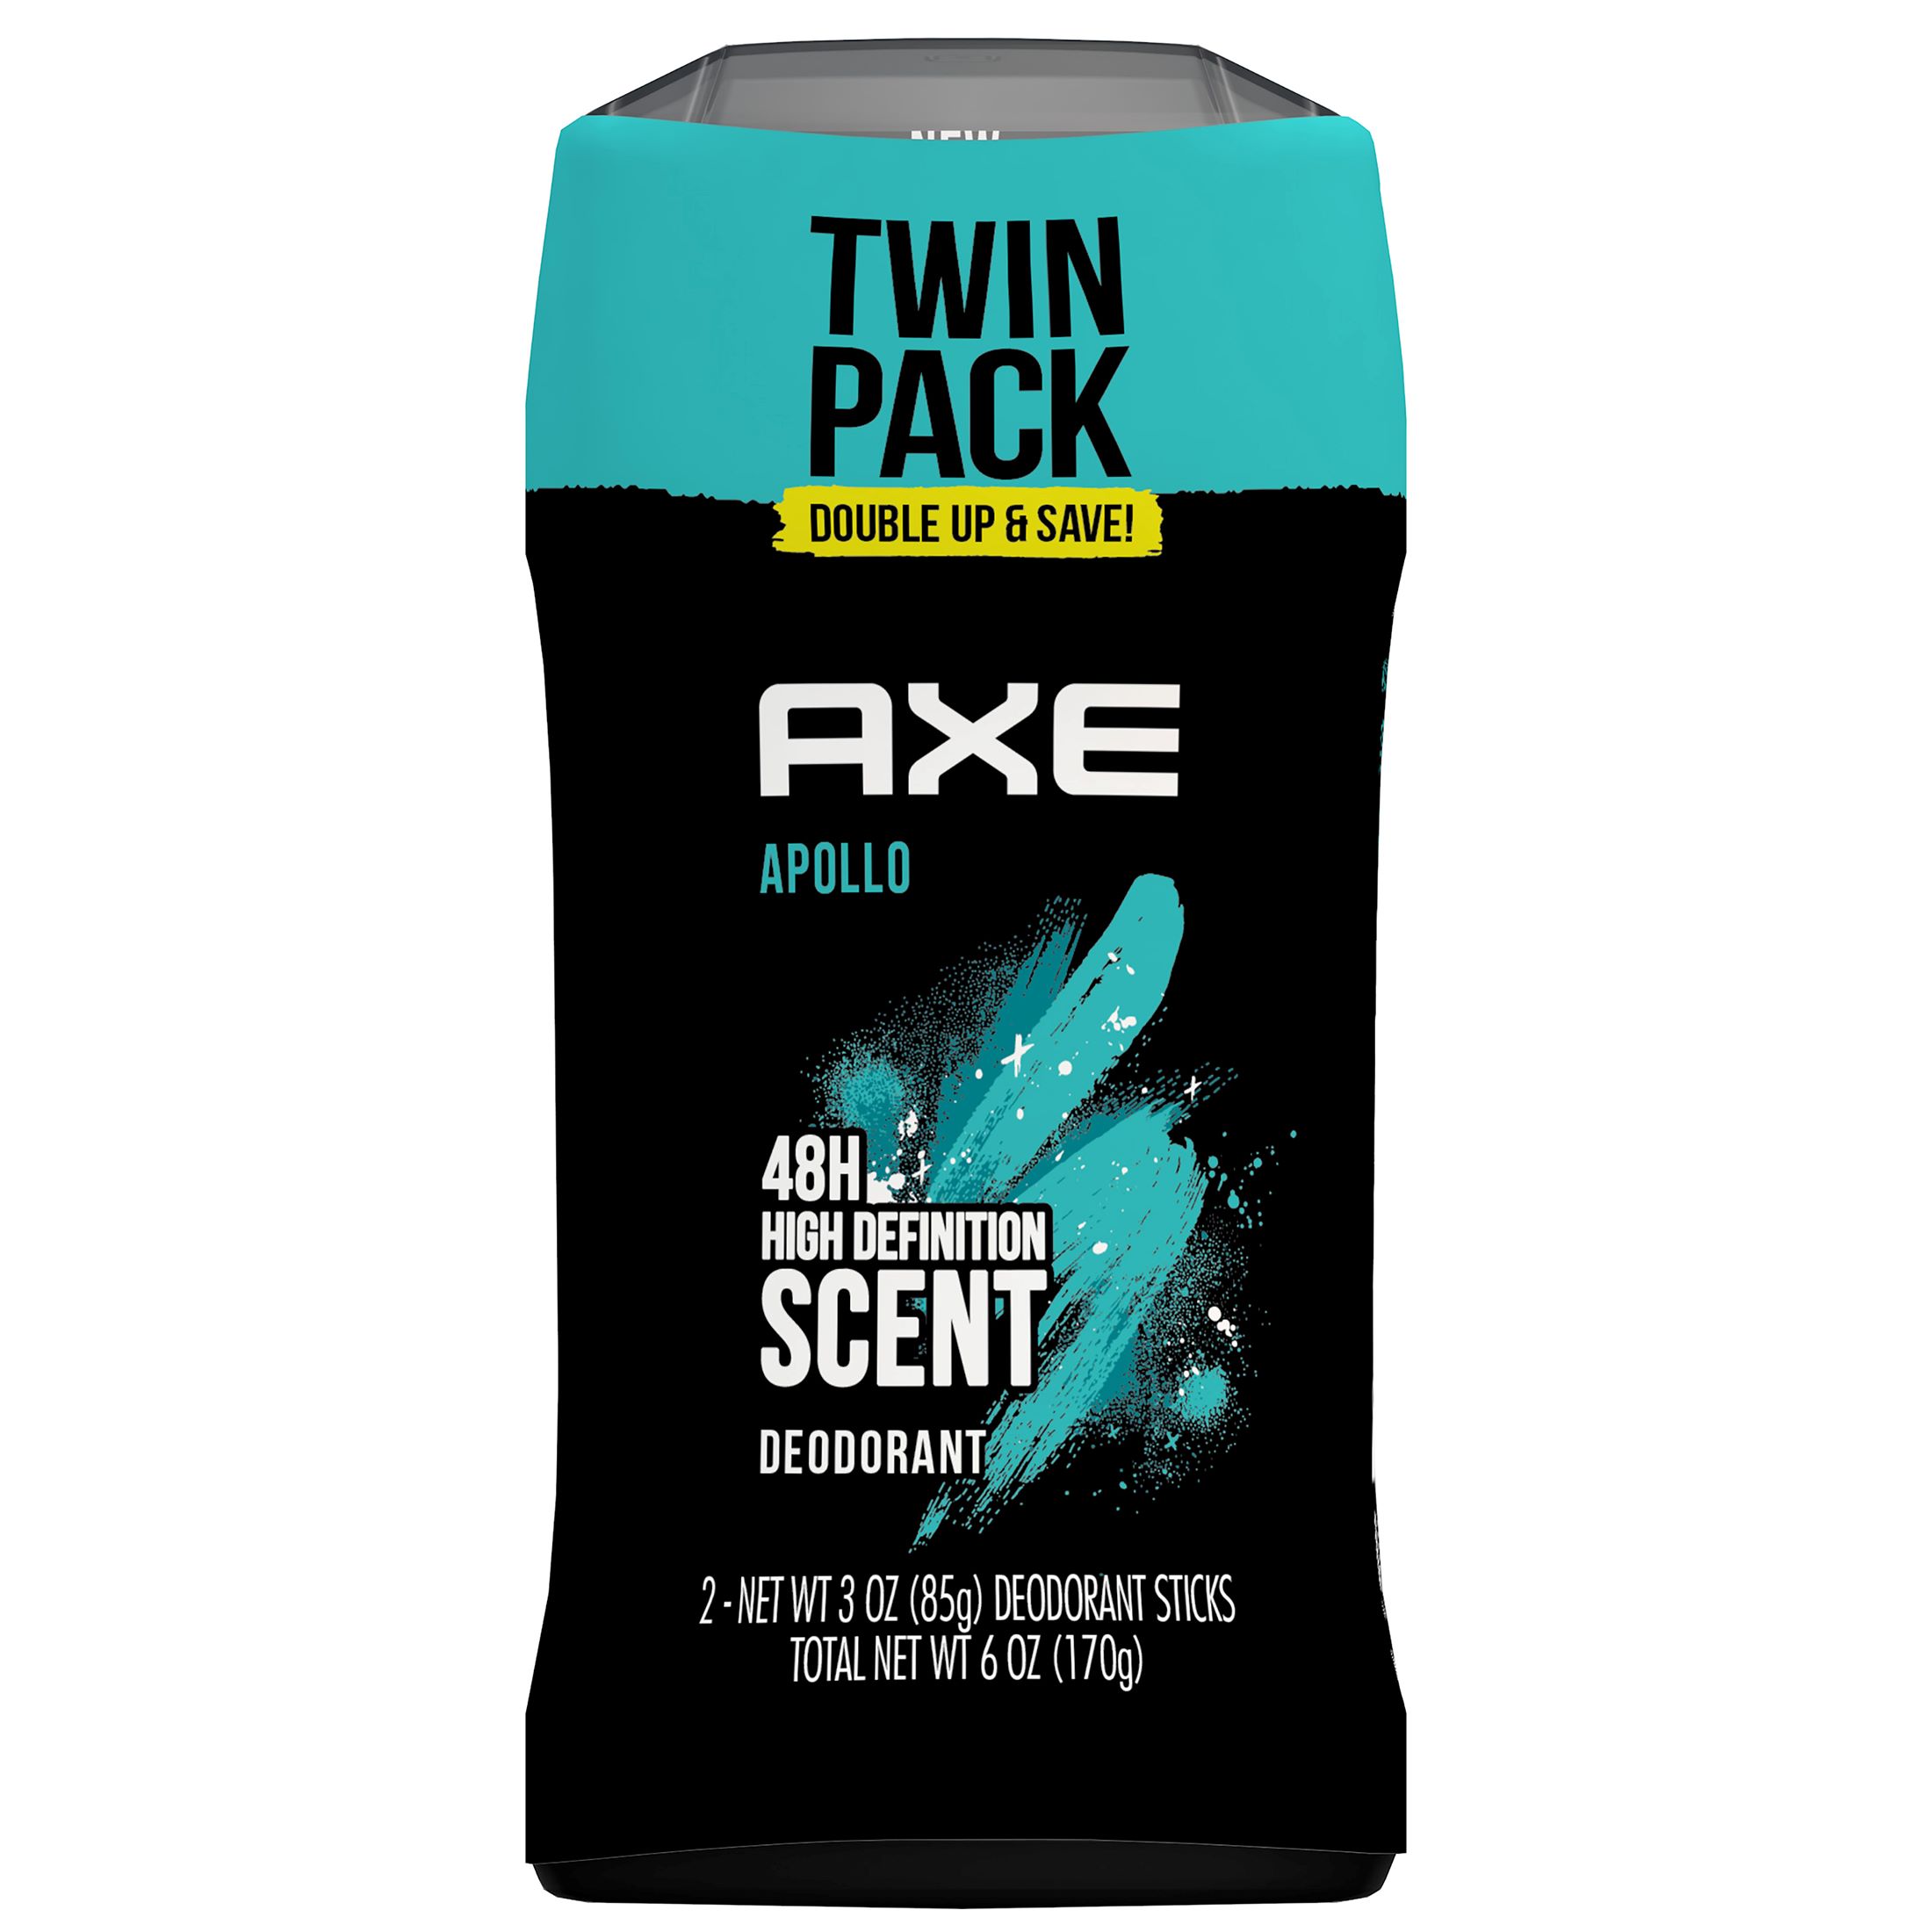 Axe Apollo Long Lasting Men's Deodorant Stick Twin Pack, Sage and Cedarwood, 3 oz - image 1 of 11